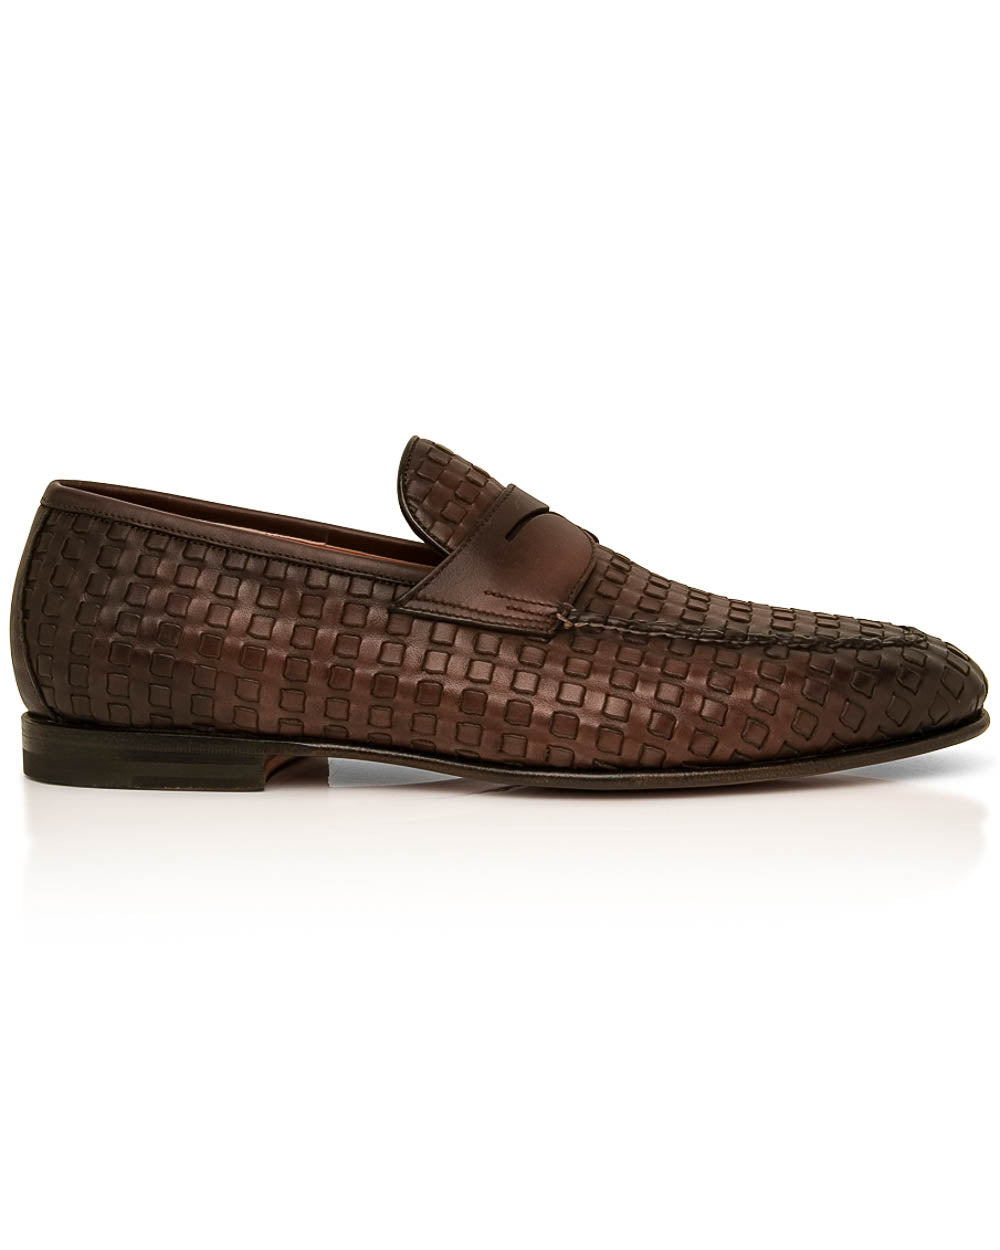 Boundary Penny Loafer in Brown